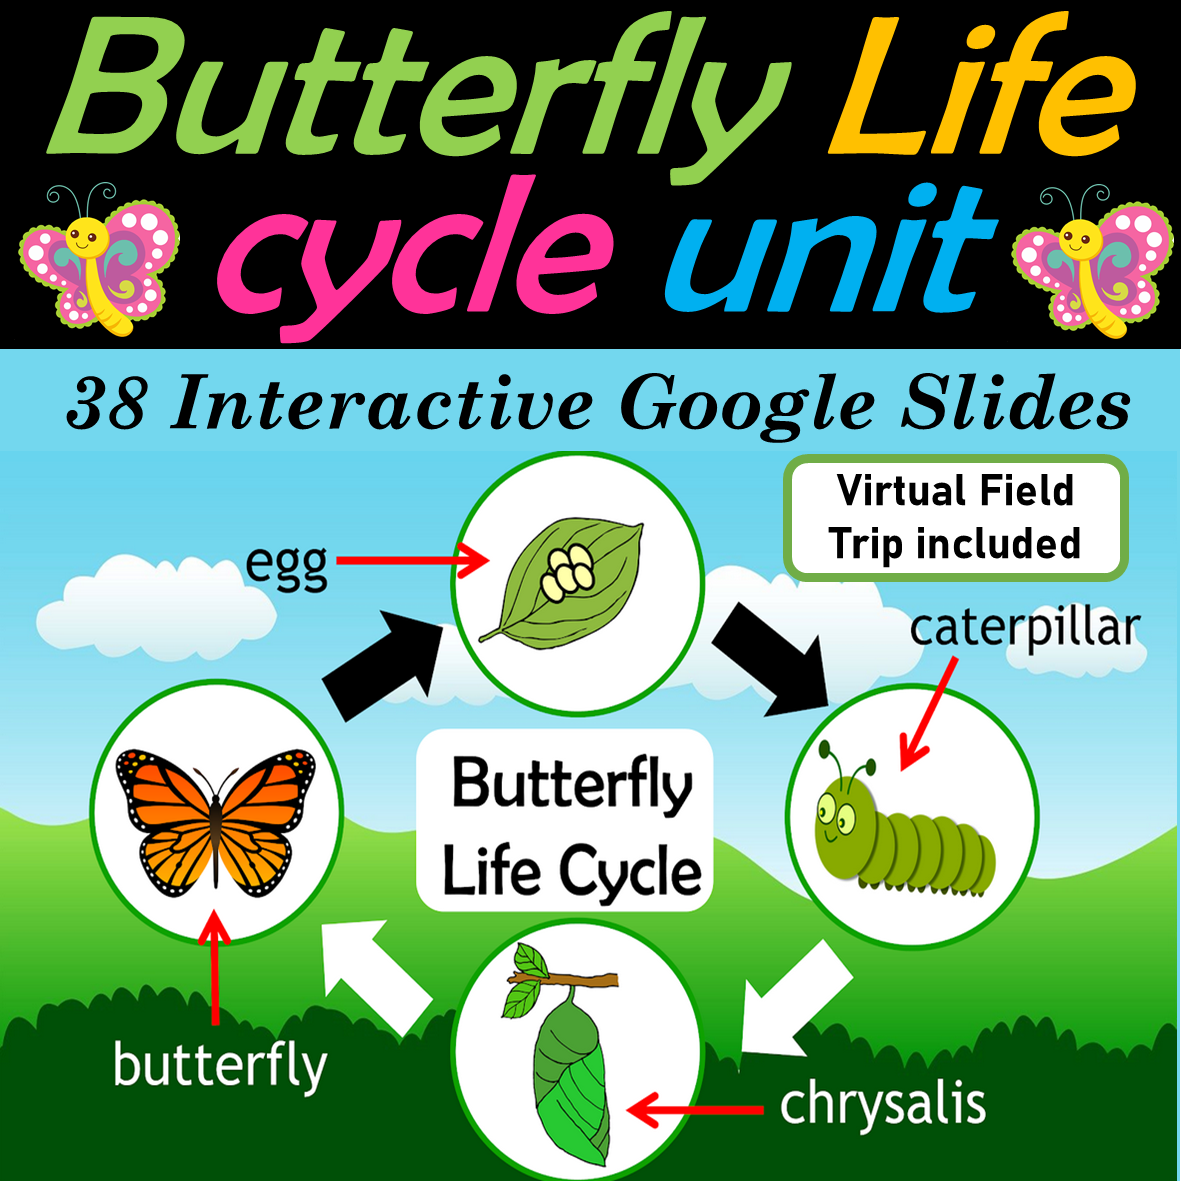 Butterfly Life Cycle | Virtual field trip to Butterfly conservatory | Digital- 35 Google Slides